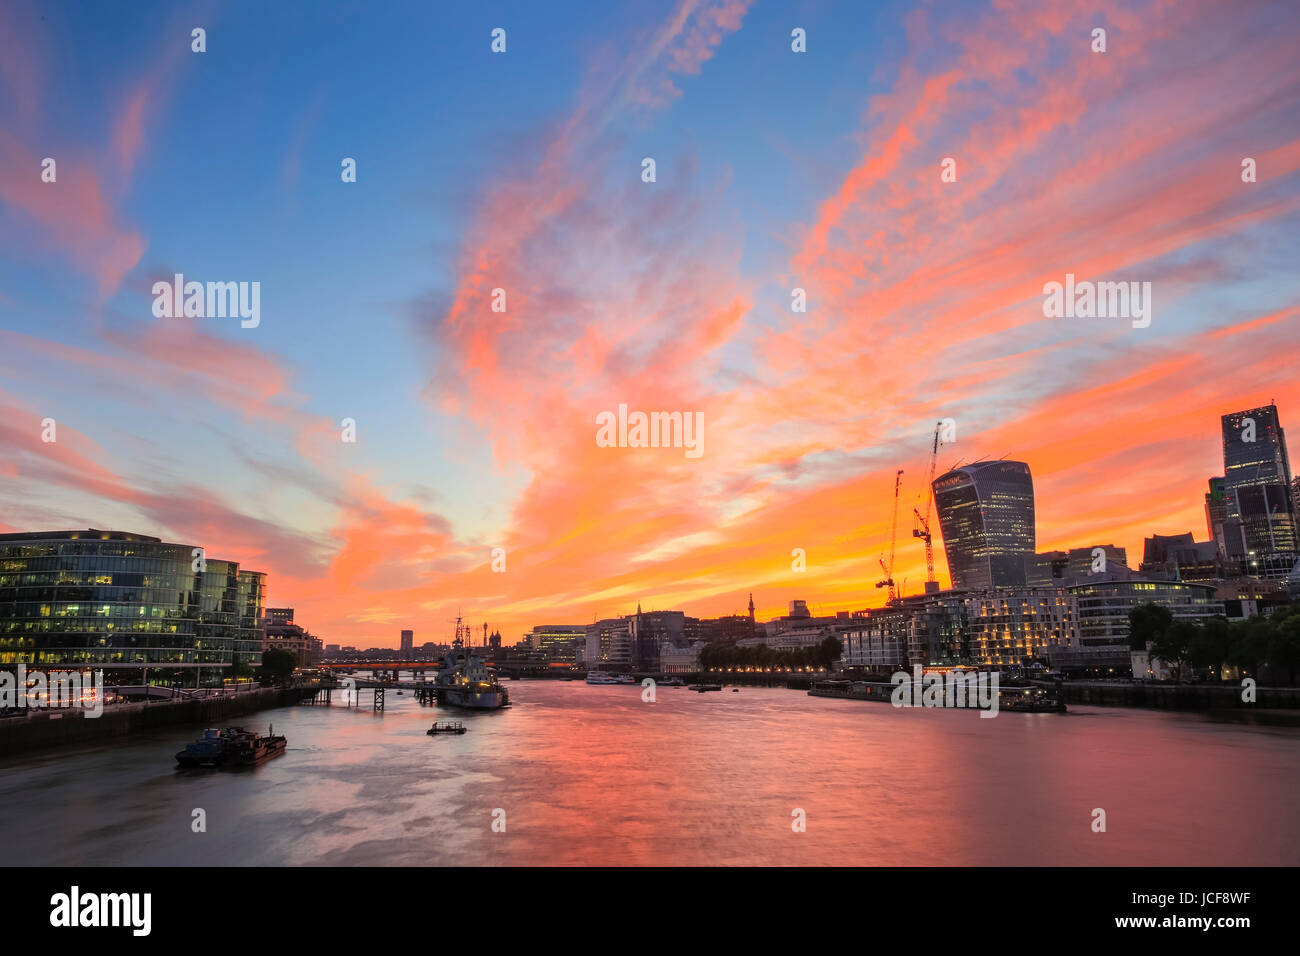 A beautifully sunny day ends with a stunning sunset sky in a panorama over City Hall, the Shard, City of London and the River Thames in London, UK Stock Photo